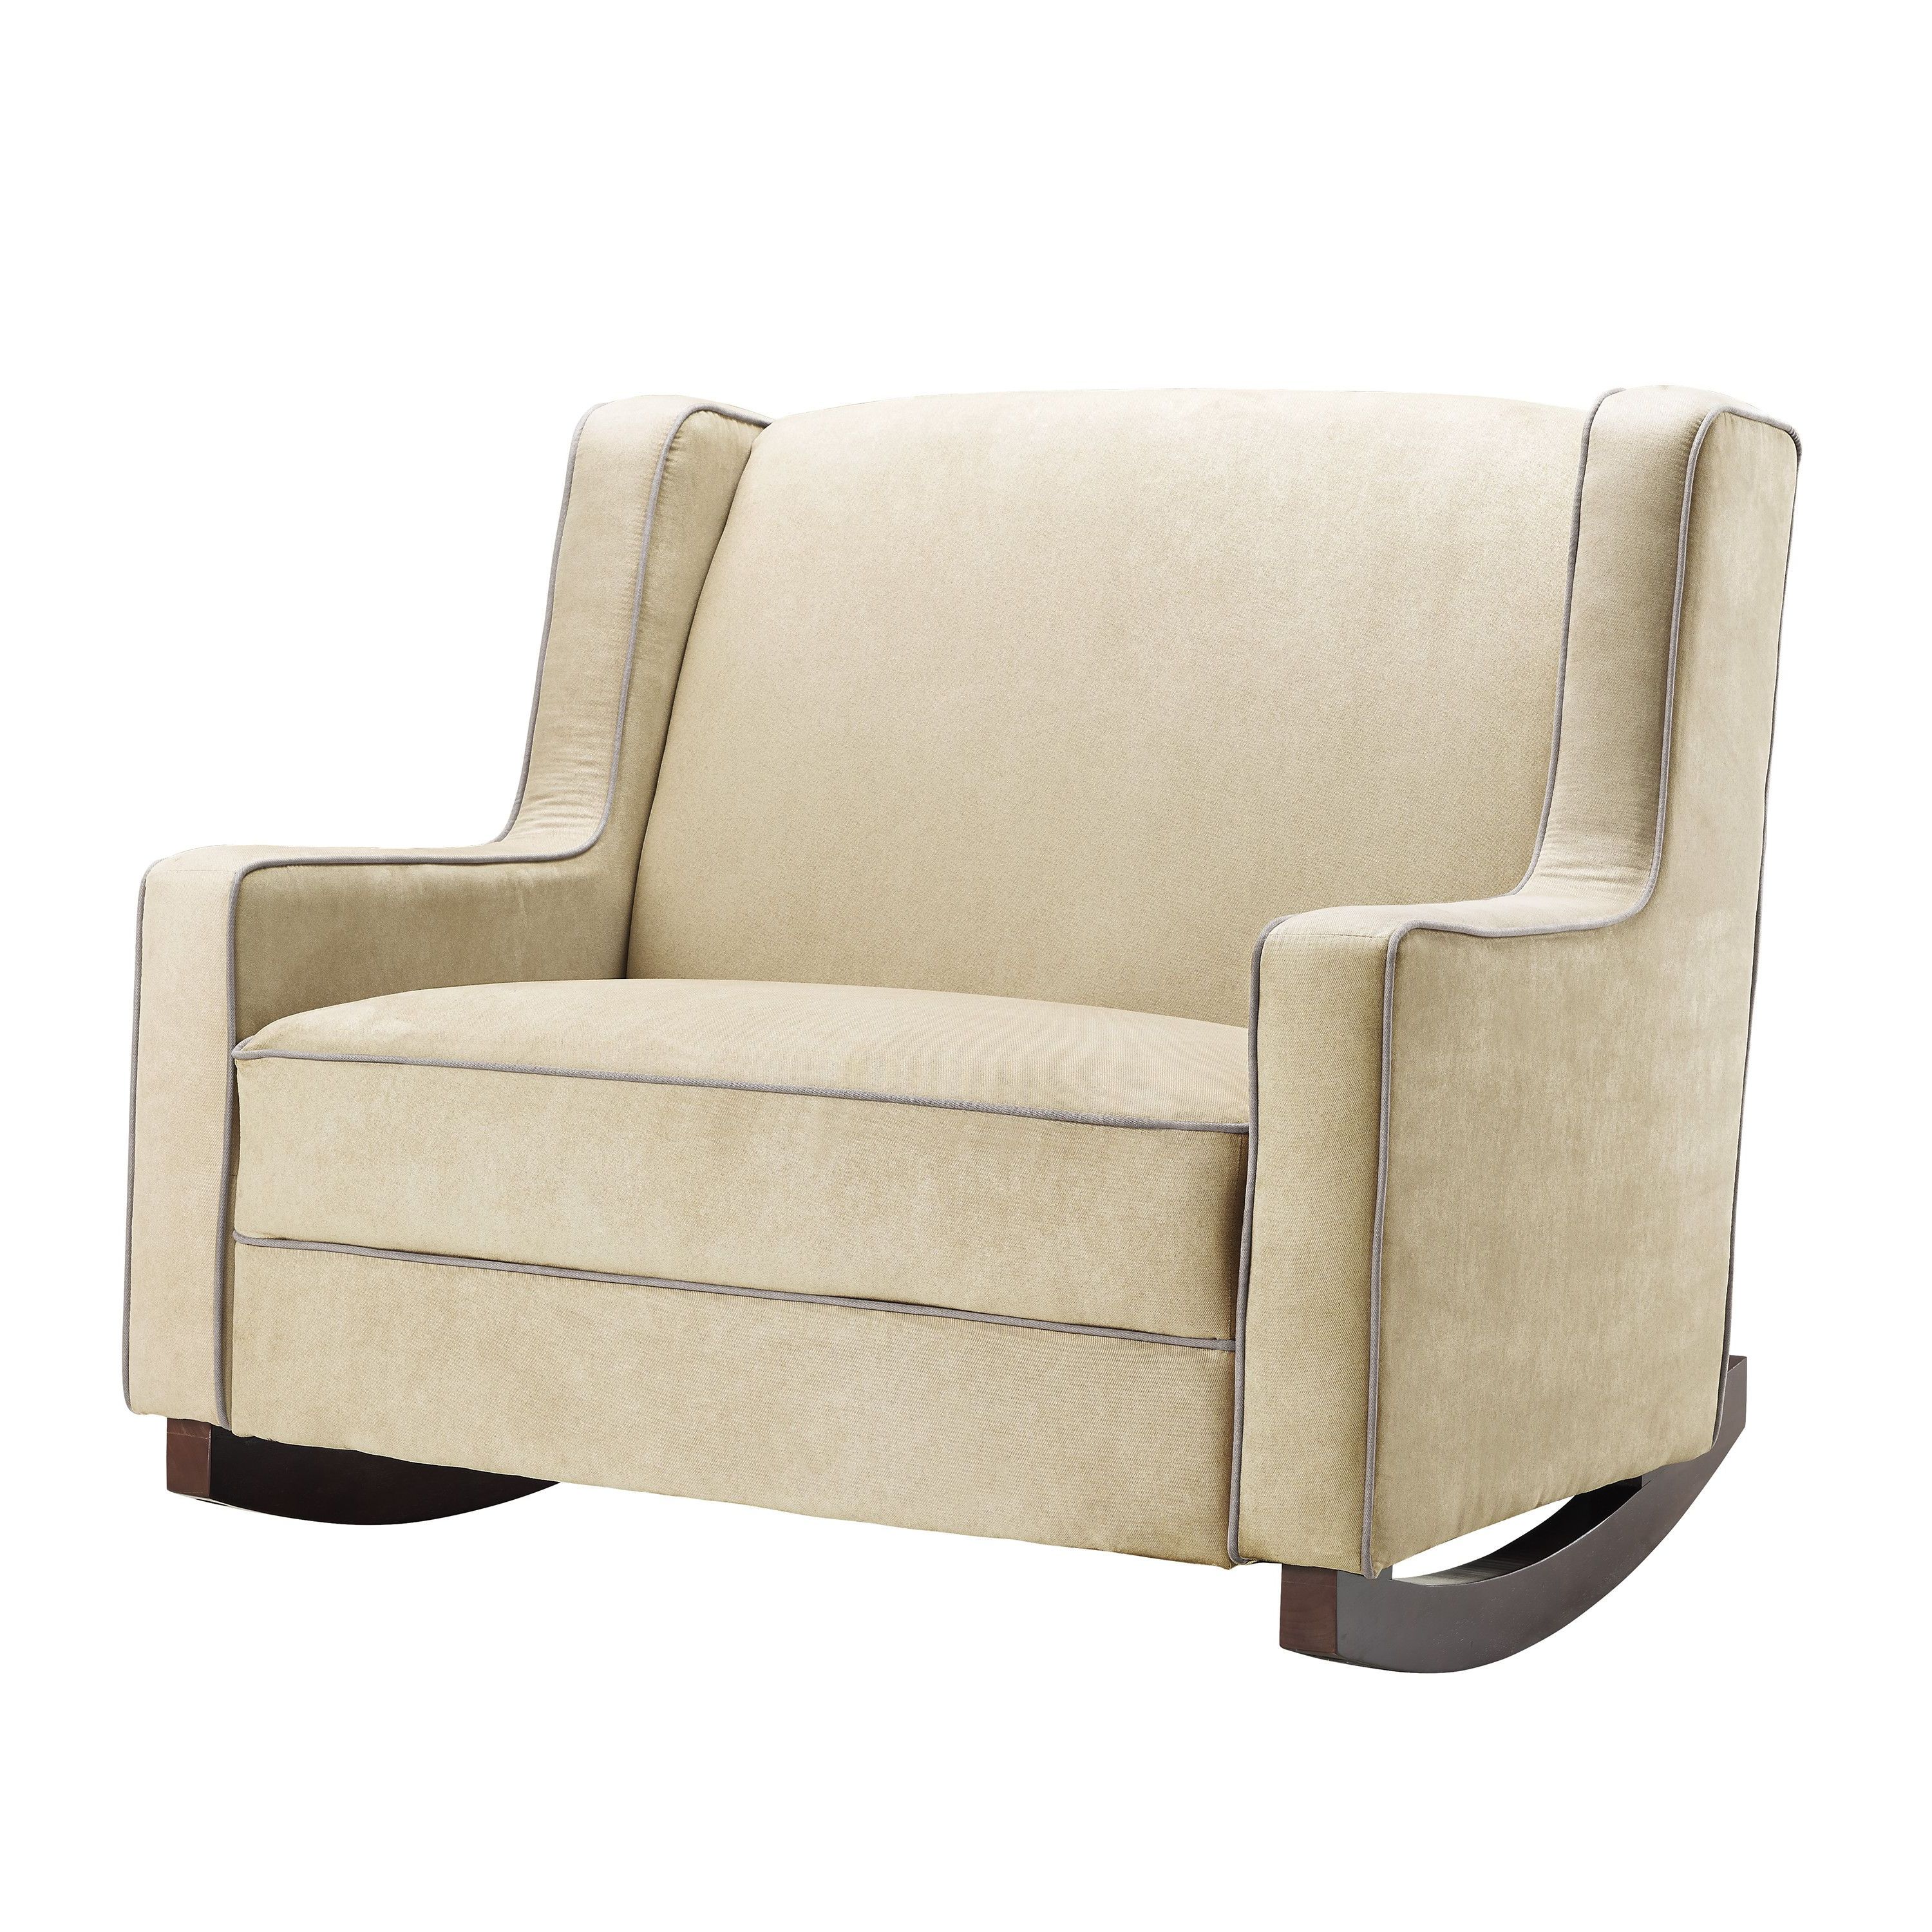 Double Rocking Chair, Nursery And Babies With Trendy Mari Swivel Glider Recliners (View 8 of 20)